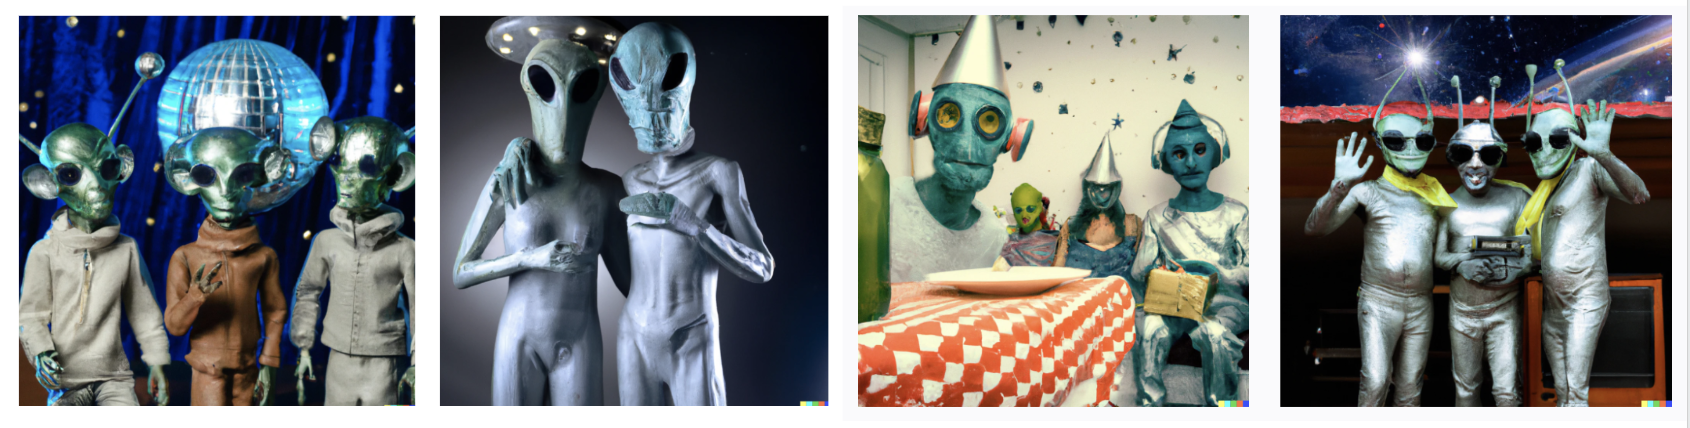 Trio of images generated by the Dall-E 2 algorithm released by Open AI, output of the query “aliens with carnival masks in a party, realistic photography”